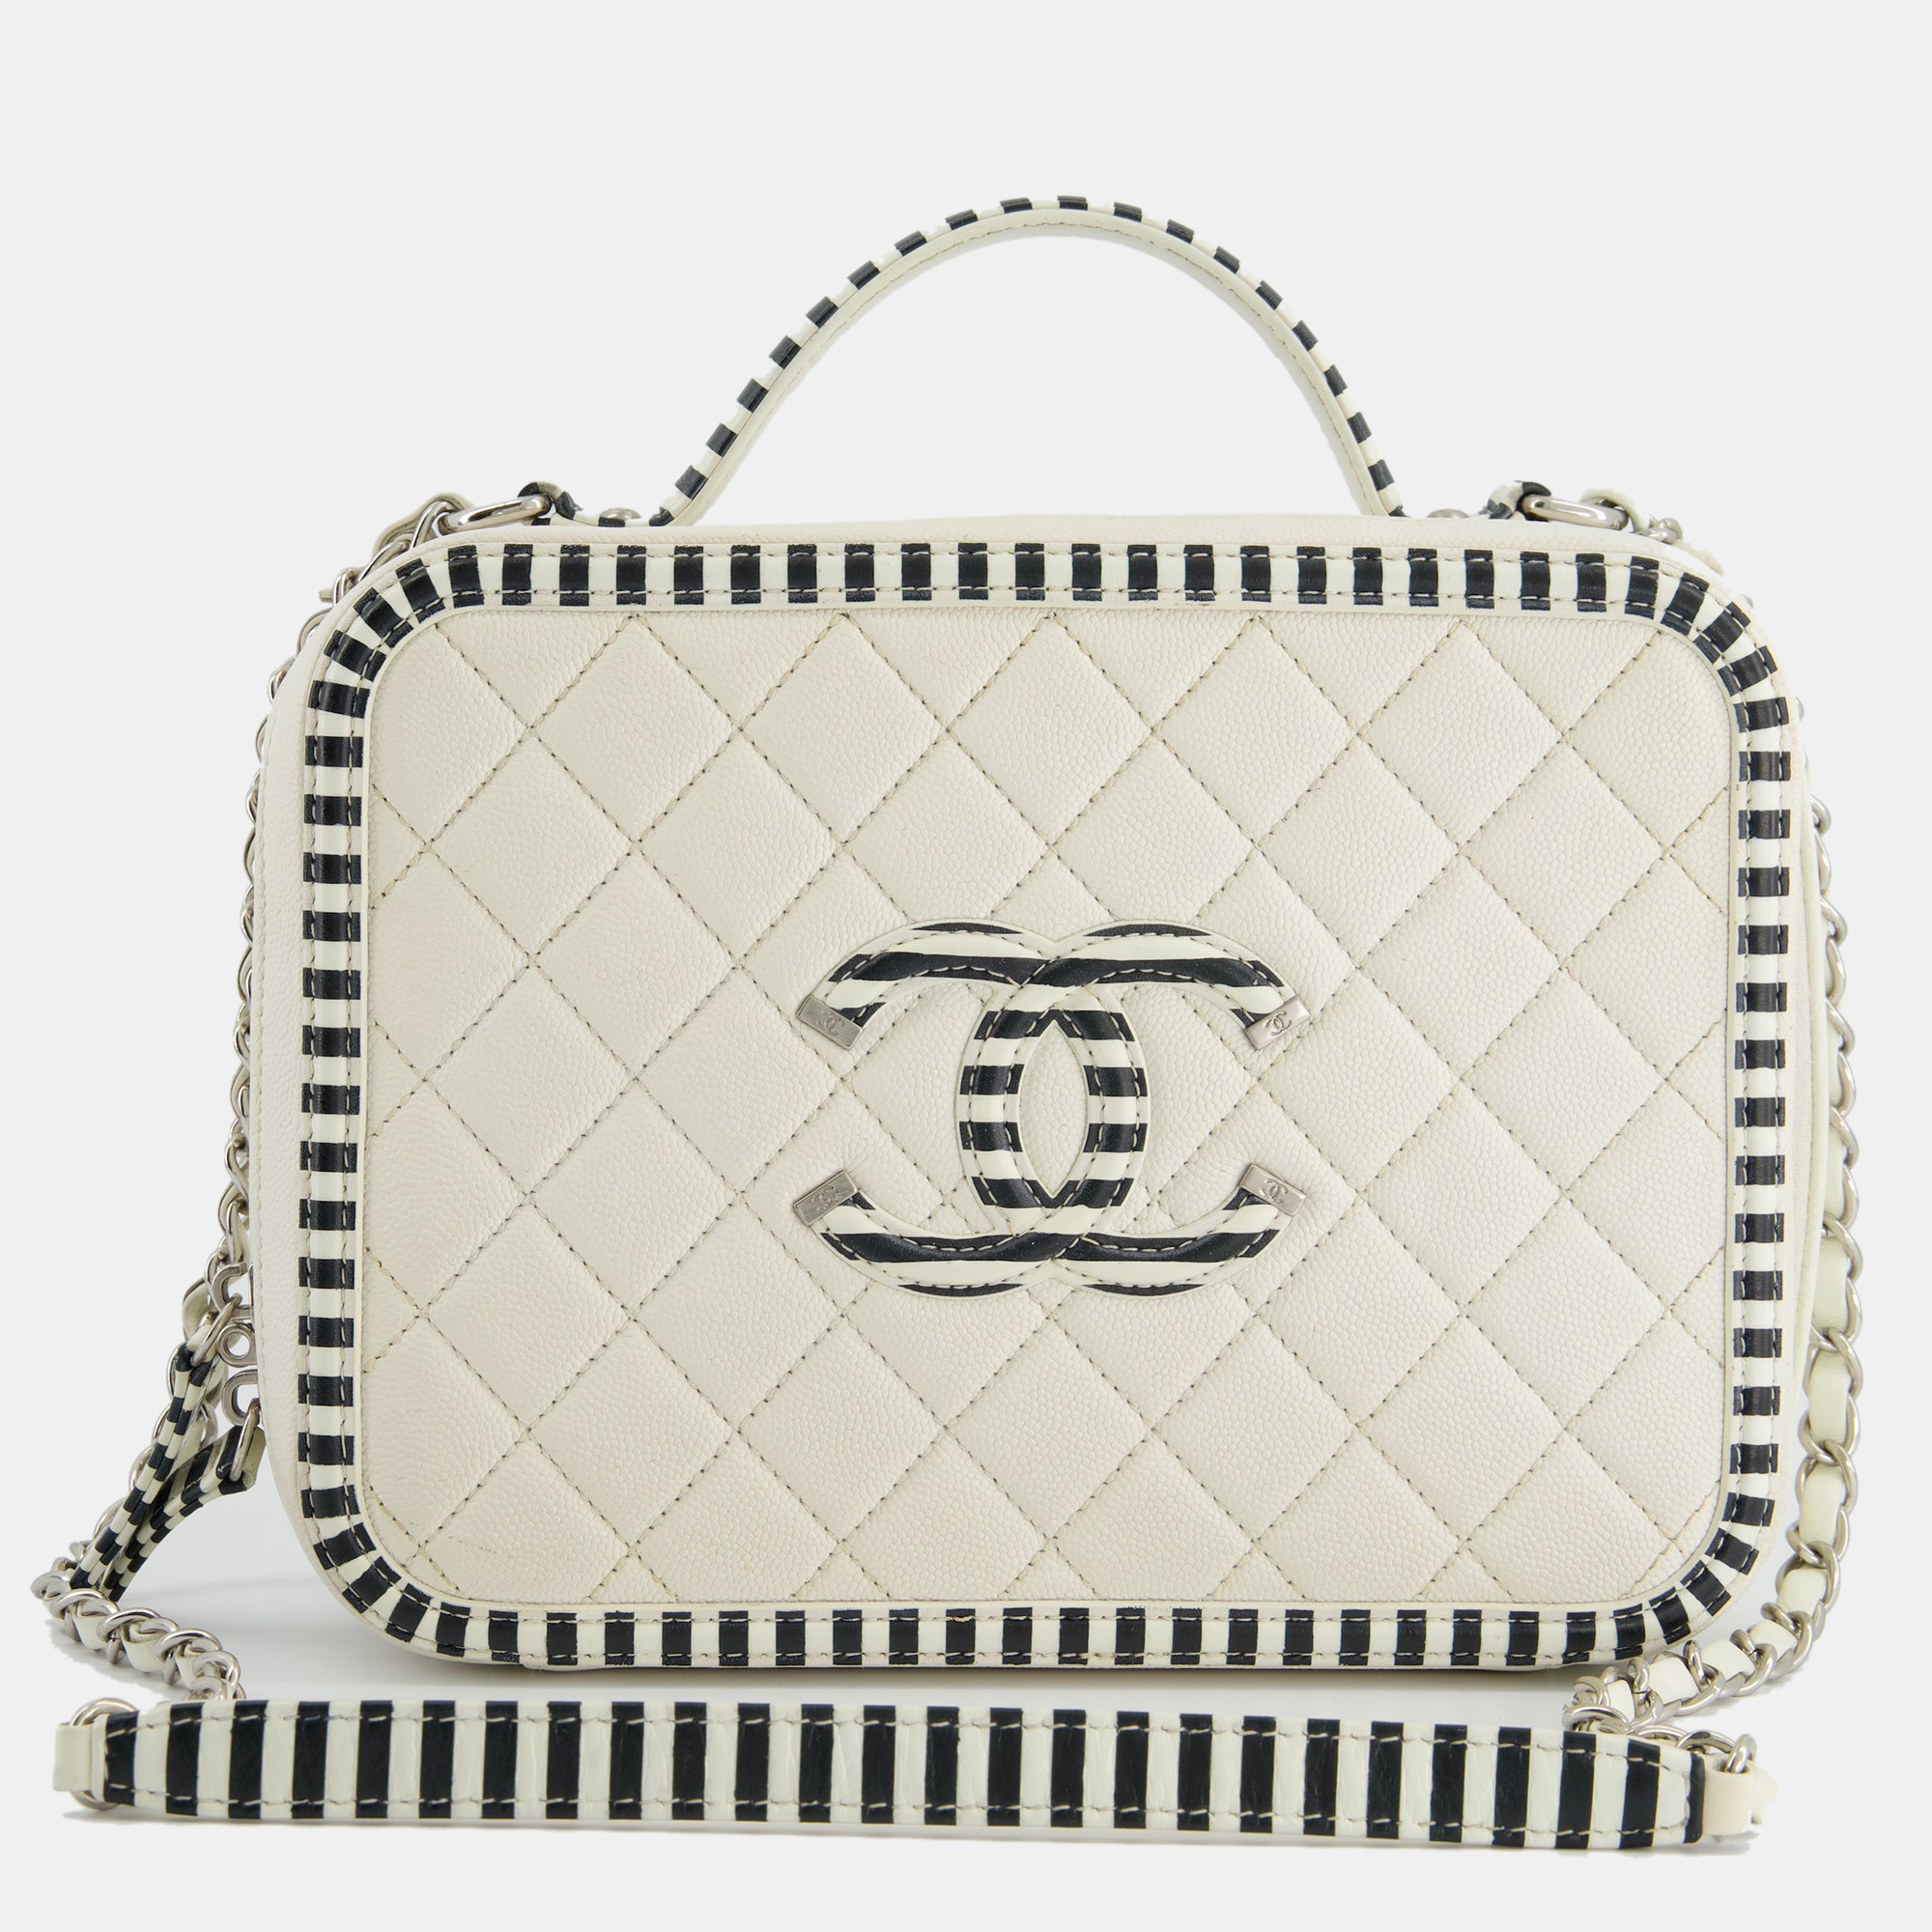 Chanel white caviar vanity case with zebra motif cc logo and silver hardware